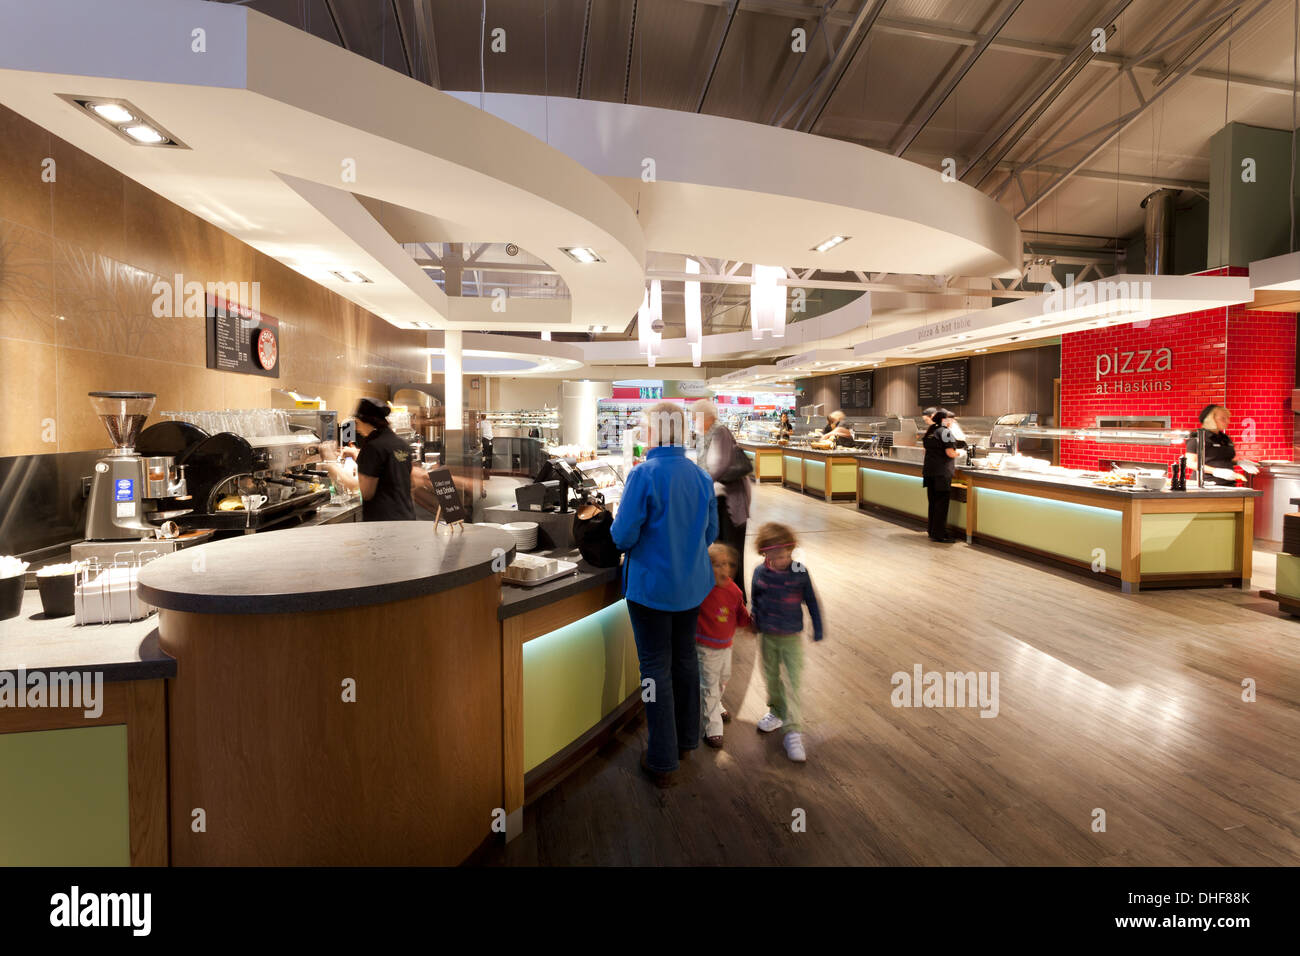 Family group at servery of large self service restaurant. Stock Photo